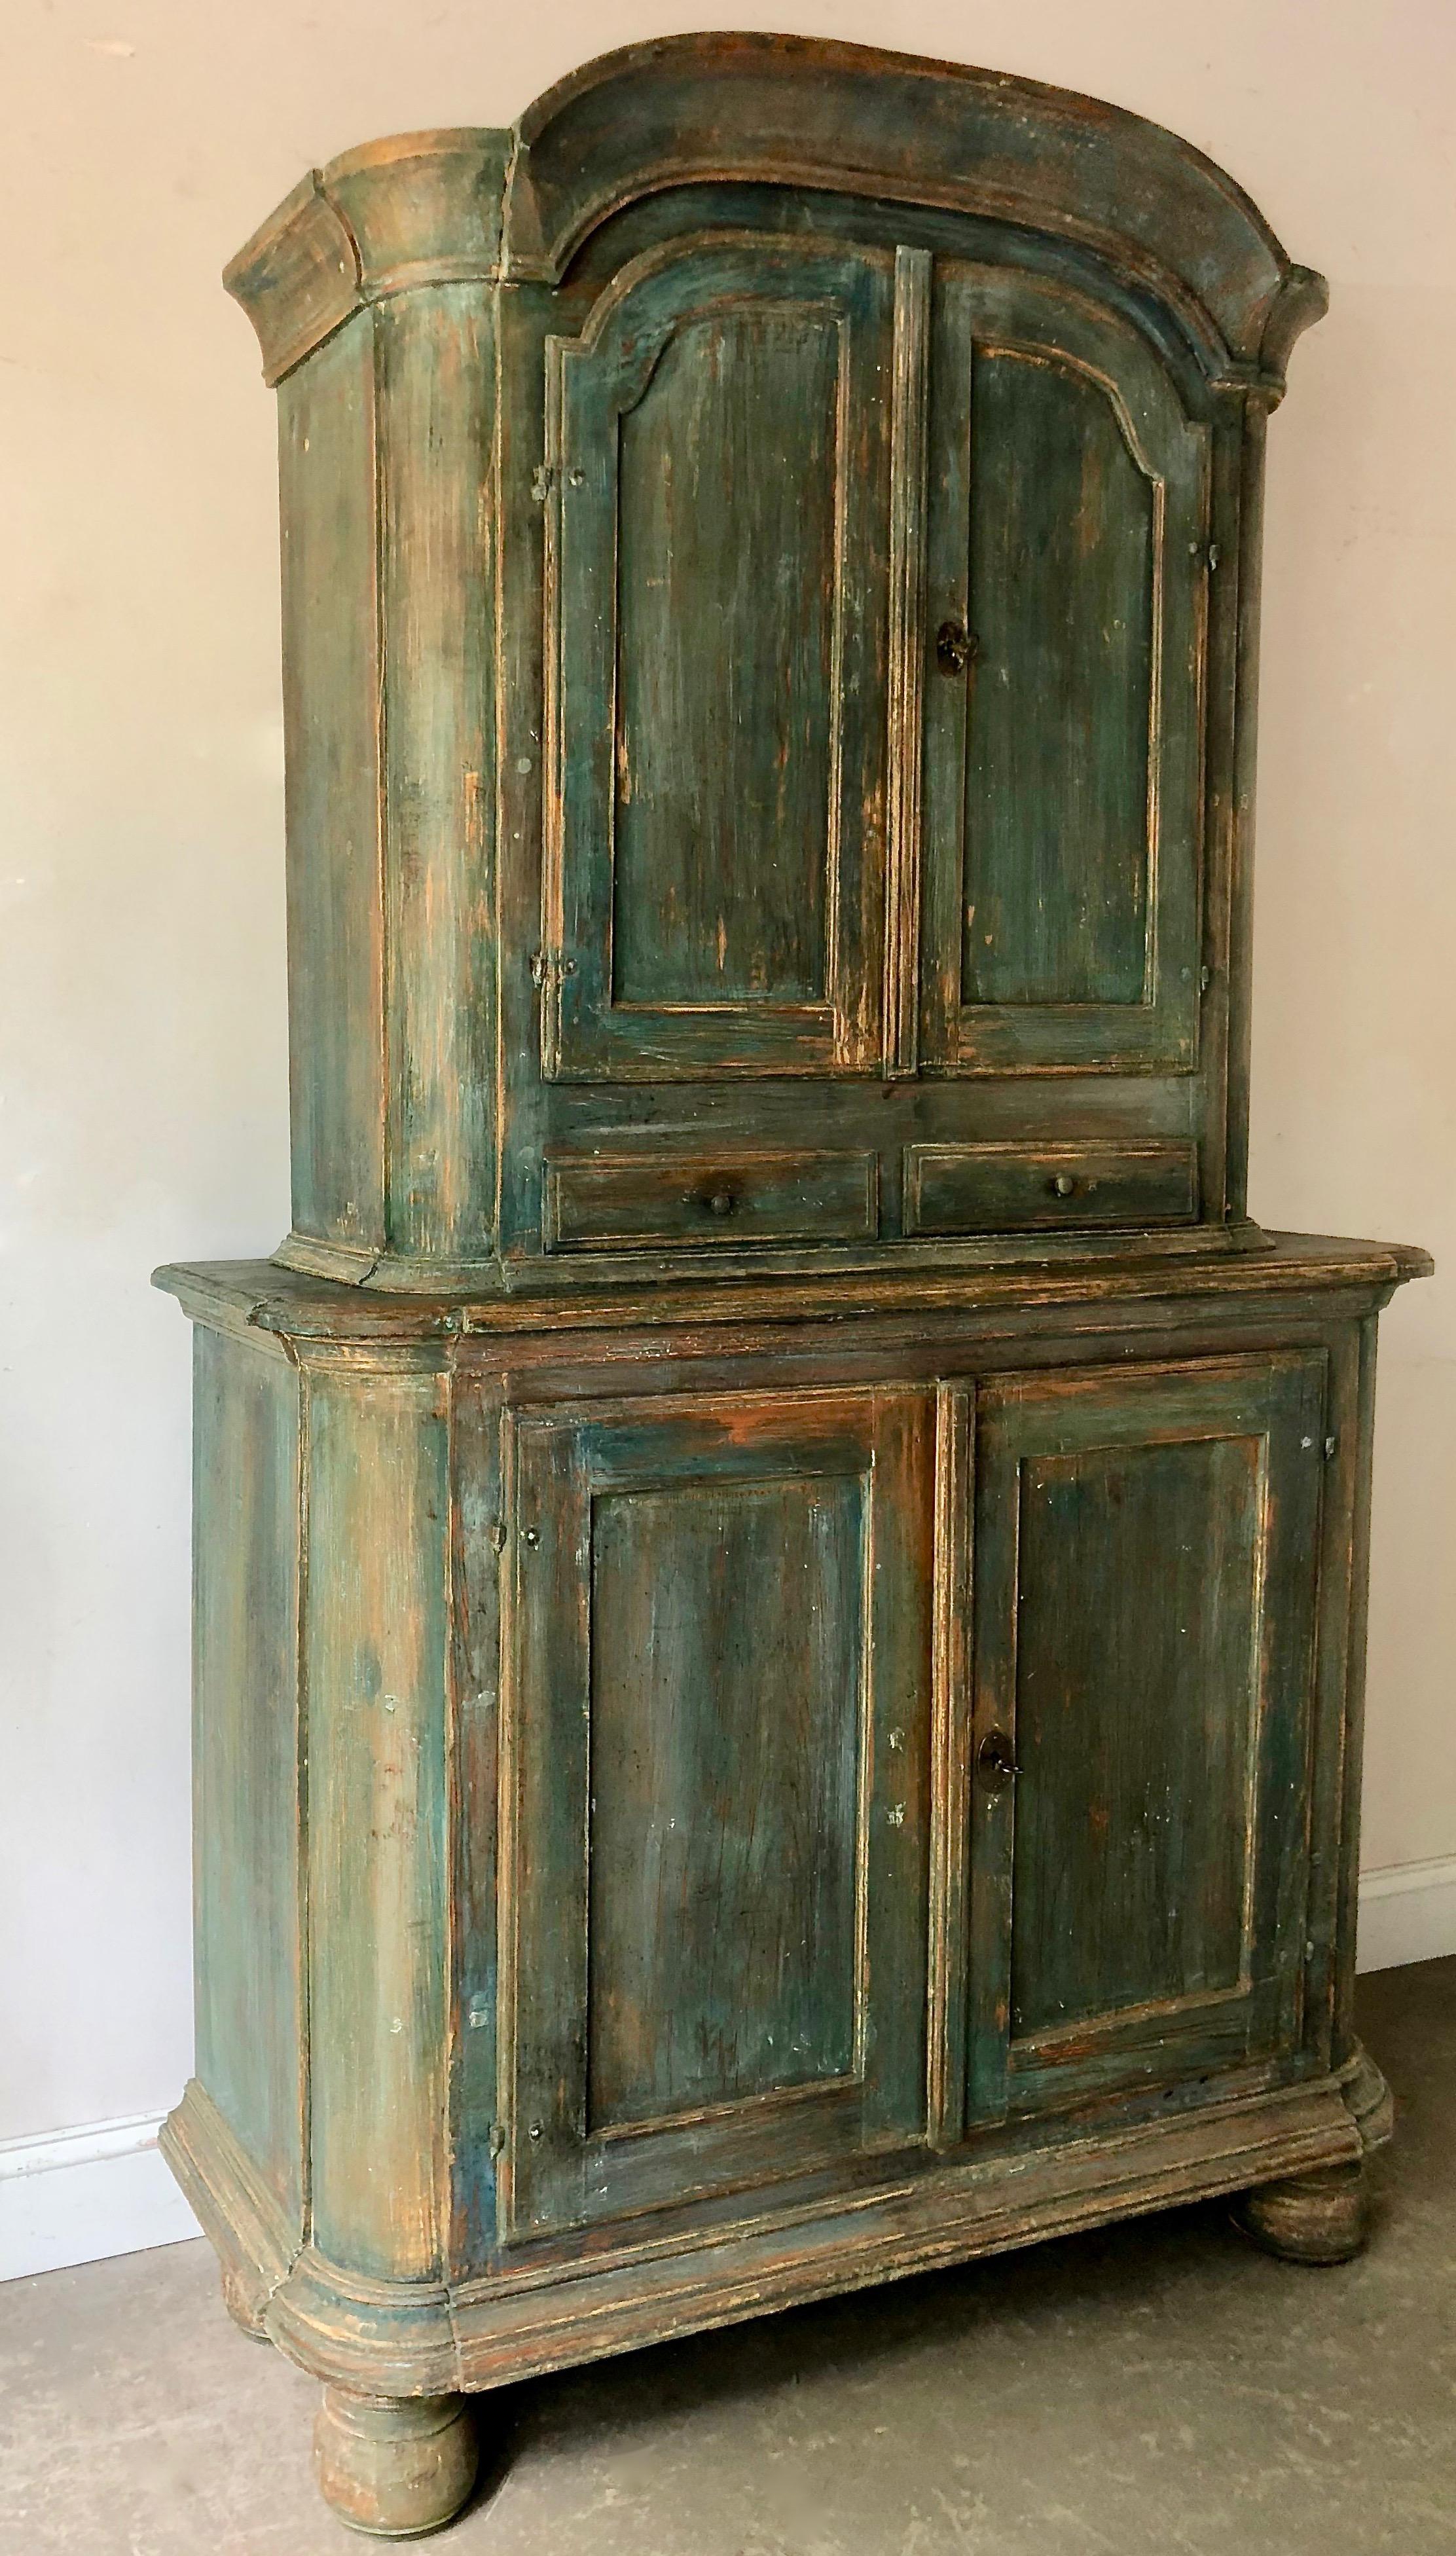 18th century period Rococo Swedish cabinet with bonnet top, two interior shelves and one notched spoon shelf, two additional middle drawers, all supported by sturdy lower base cabinet. All original with deep blue patina.
Dalarna, Sweden, circa